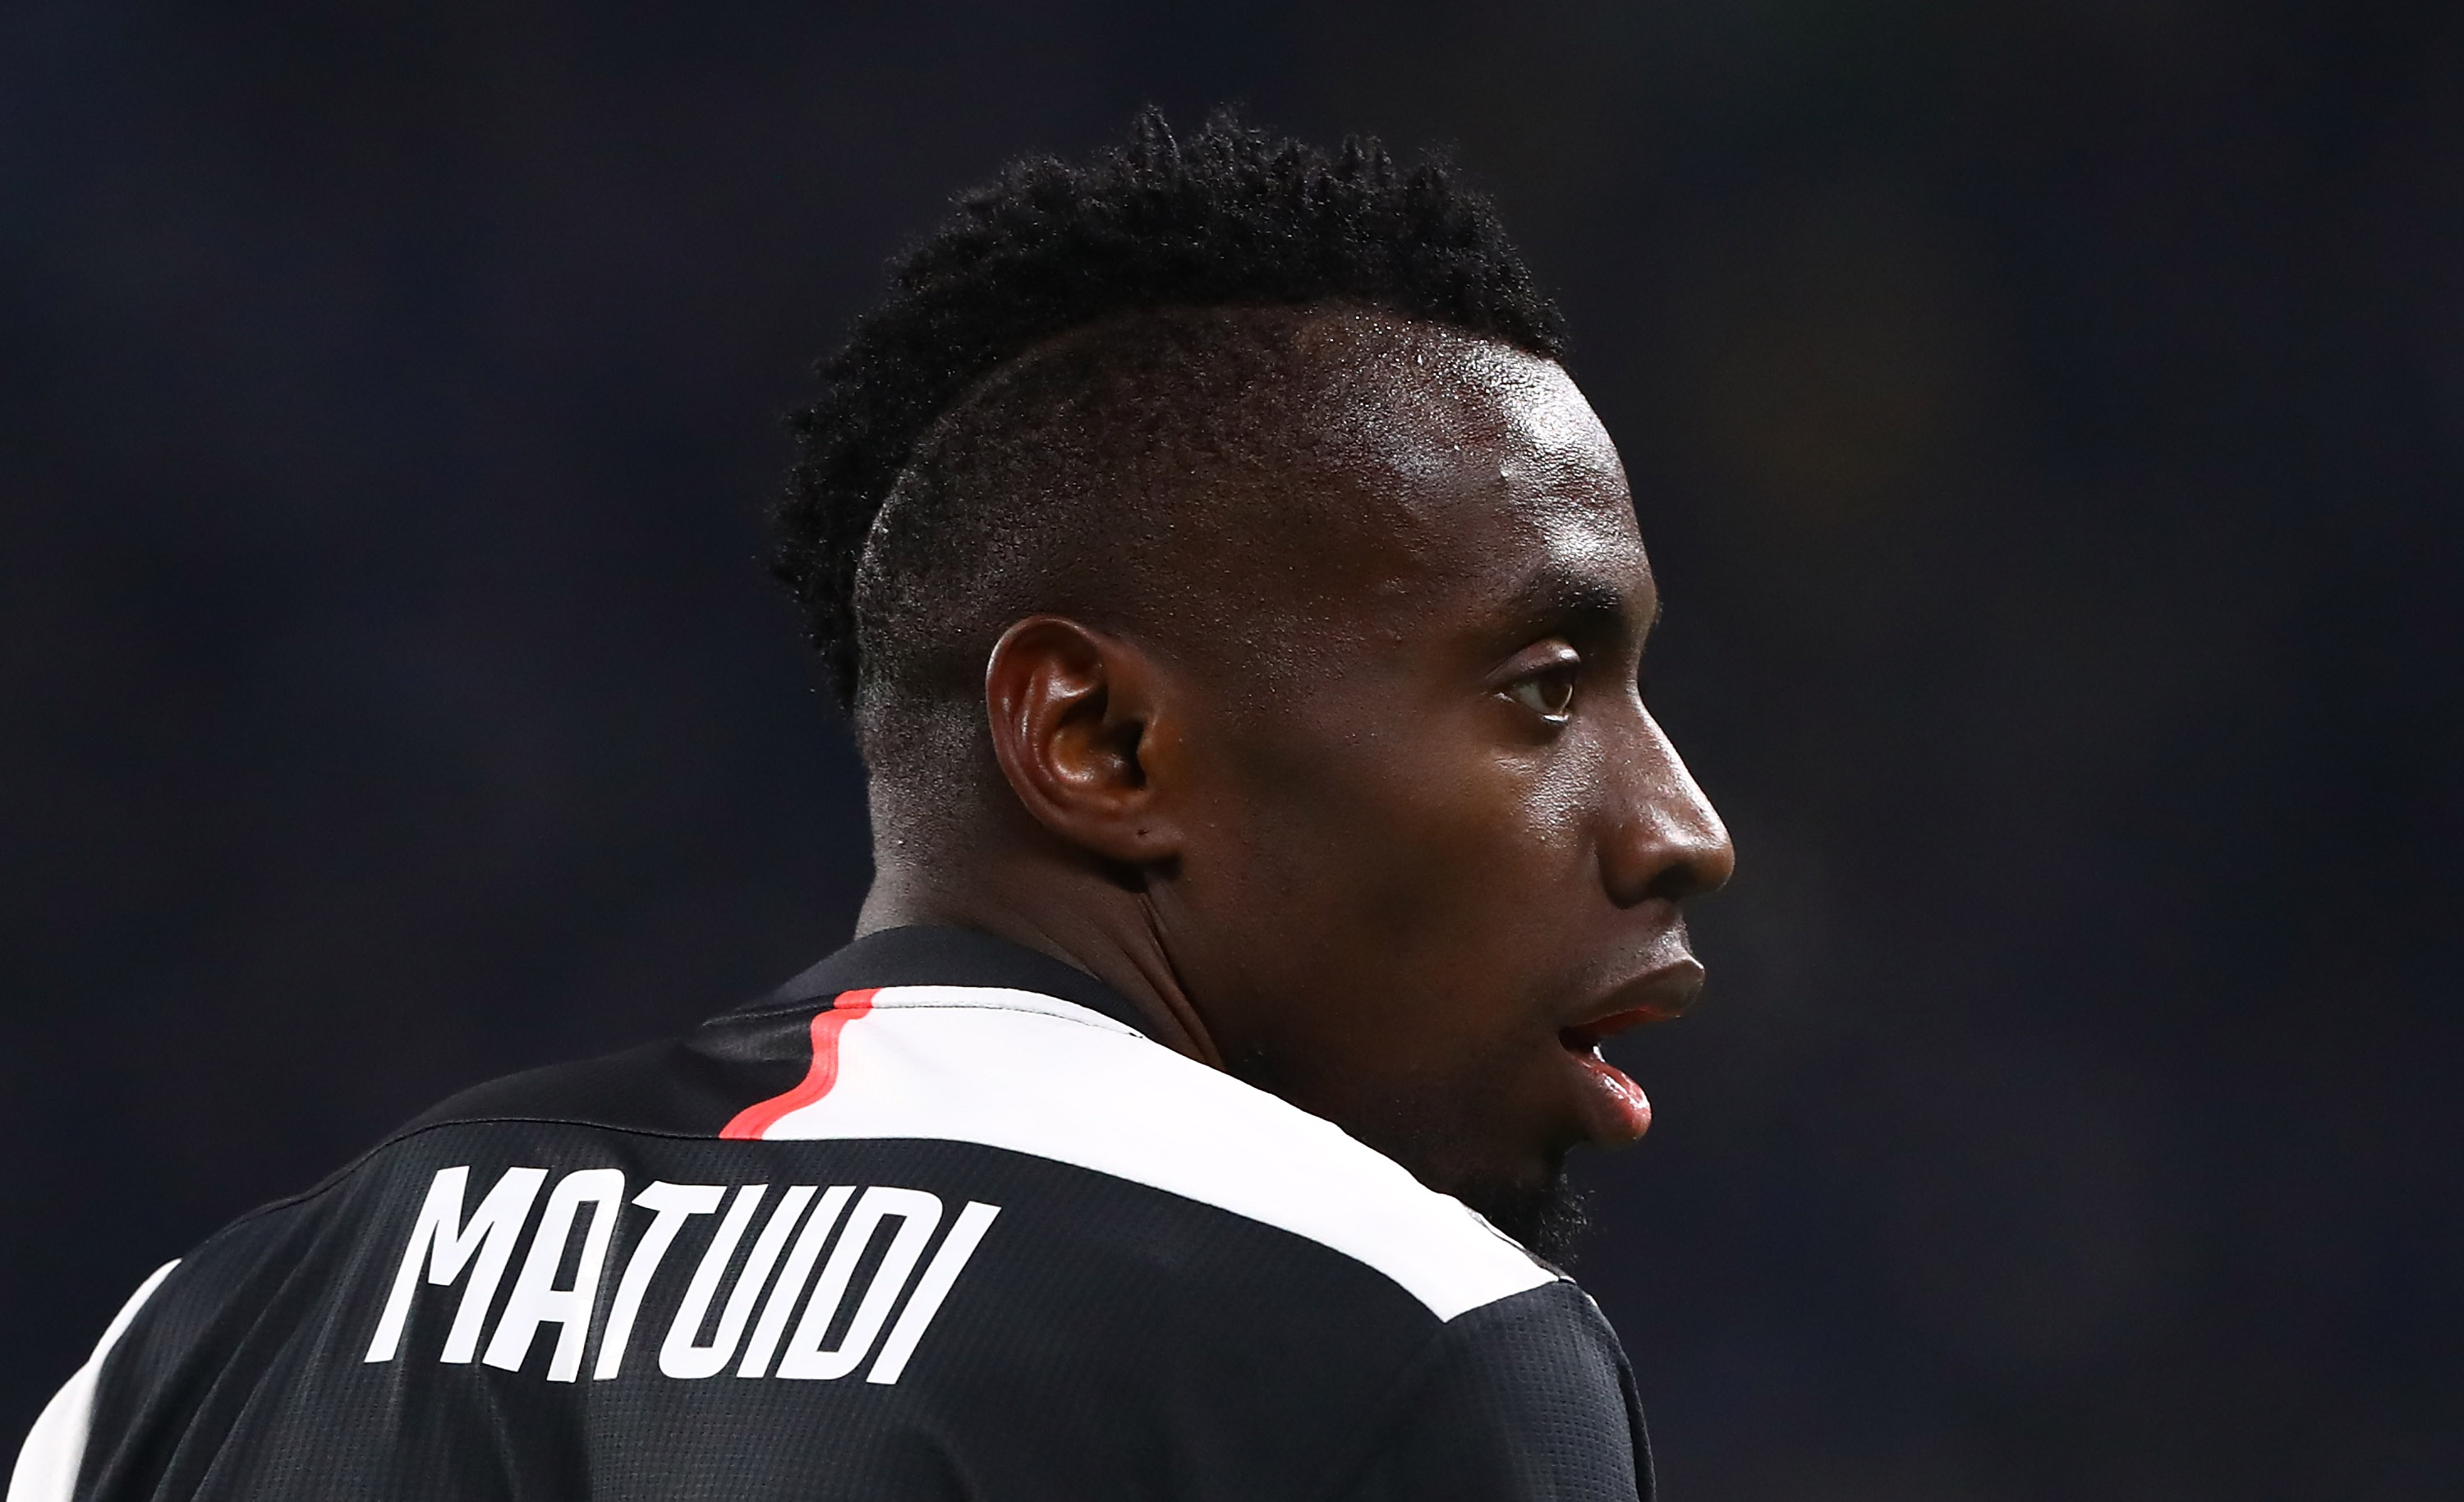 TURIN, ITALY - JANUARY 19:  Blaise Matuidi of Juventus FC looks on during the Serie A match between Juventus and Parma Calcio at Allianz Stadium on January 19, 2020 in Turin, Italy.  (Photo by Marco Luzzani/Getty Images)